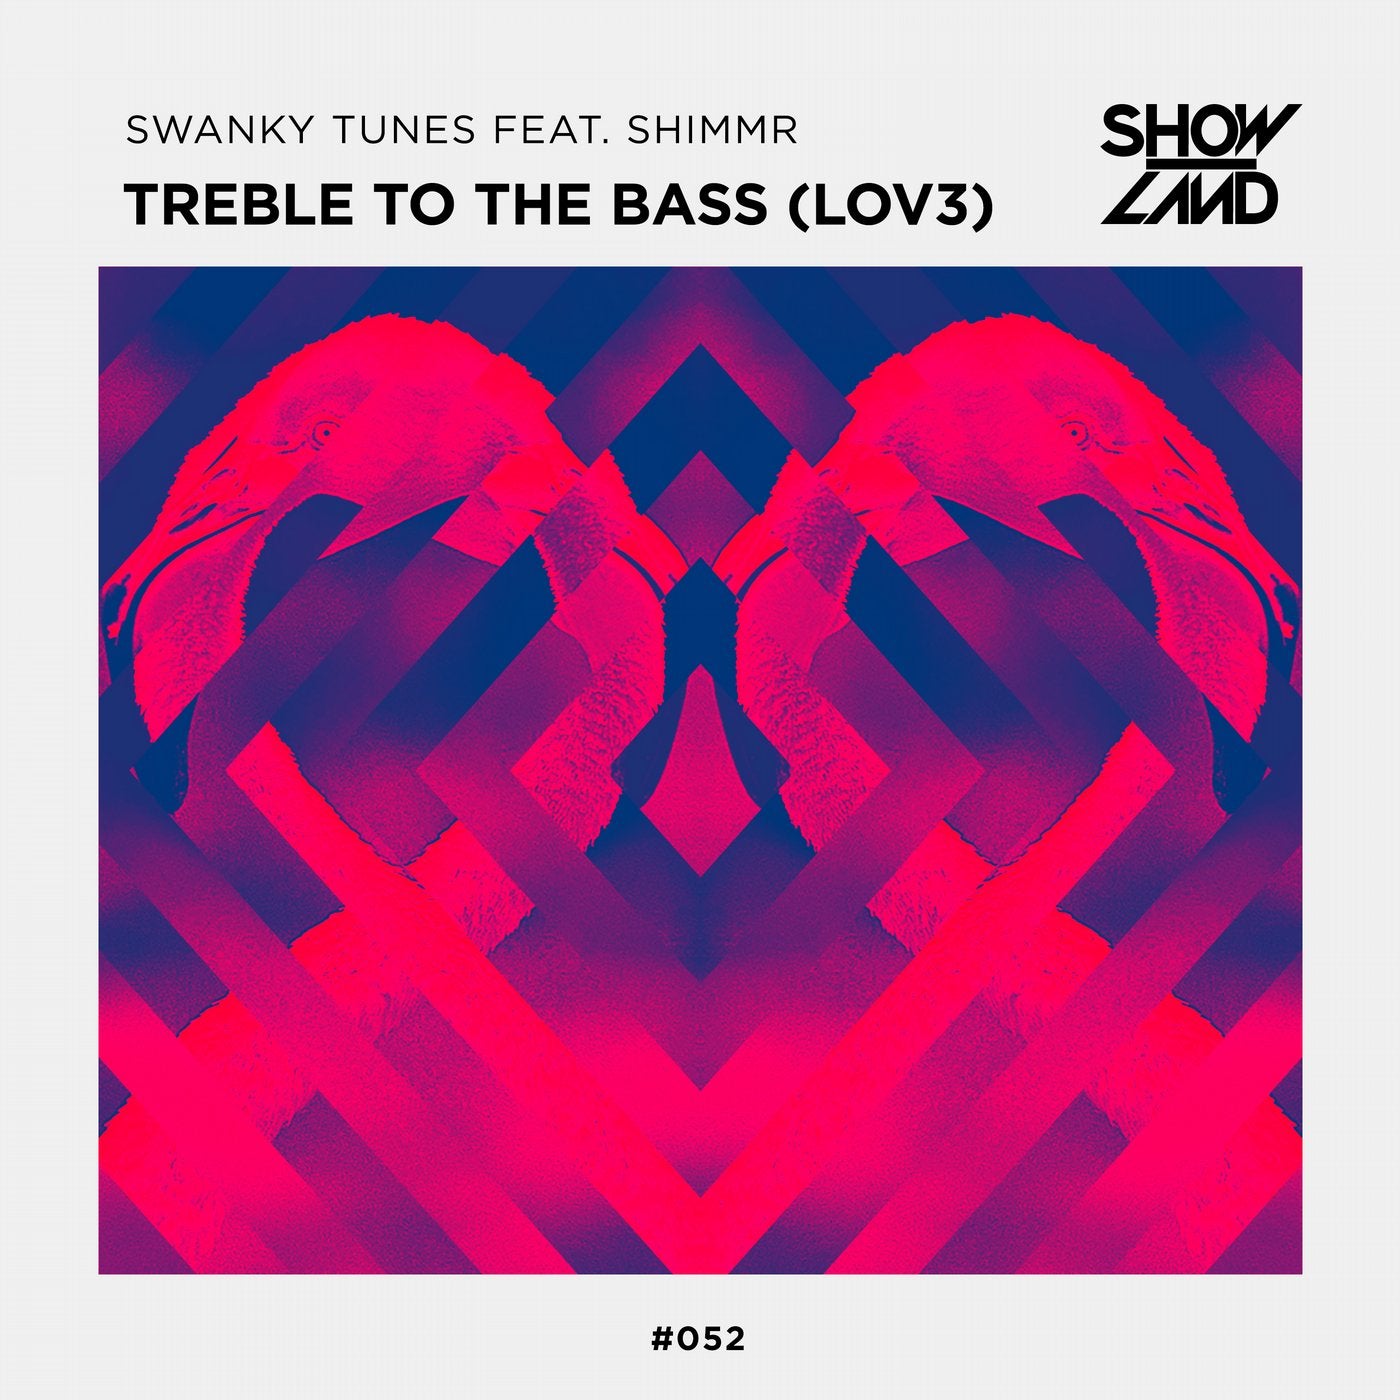 Tunes feat. Swanky Tunes. Swanky Tunes - over & over. Swanky Tunes песни. Swanky Tunes - i Love the way you move.